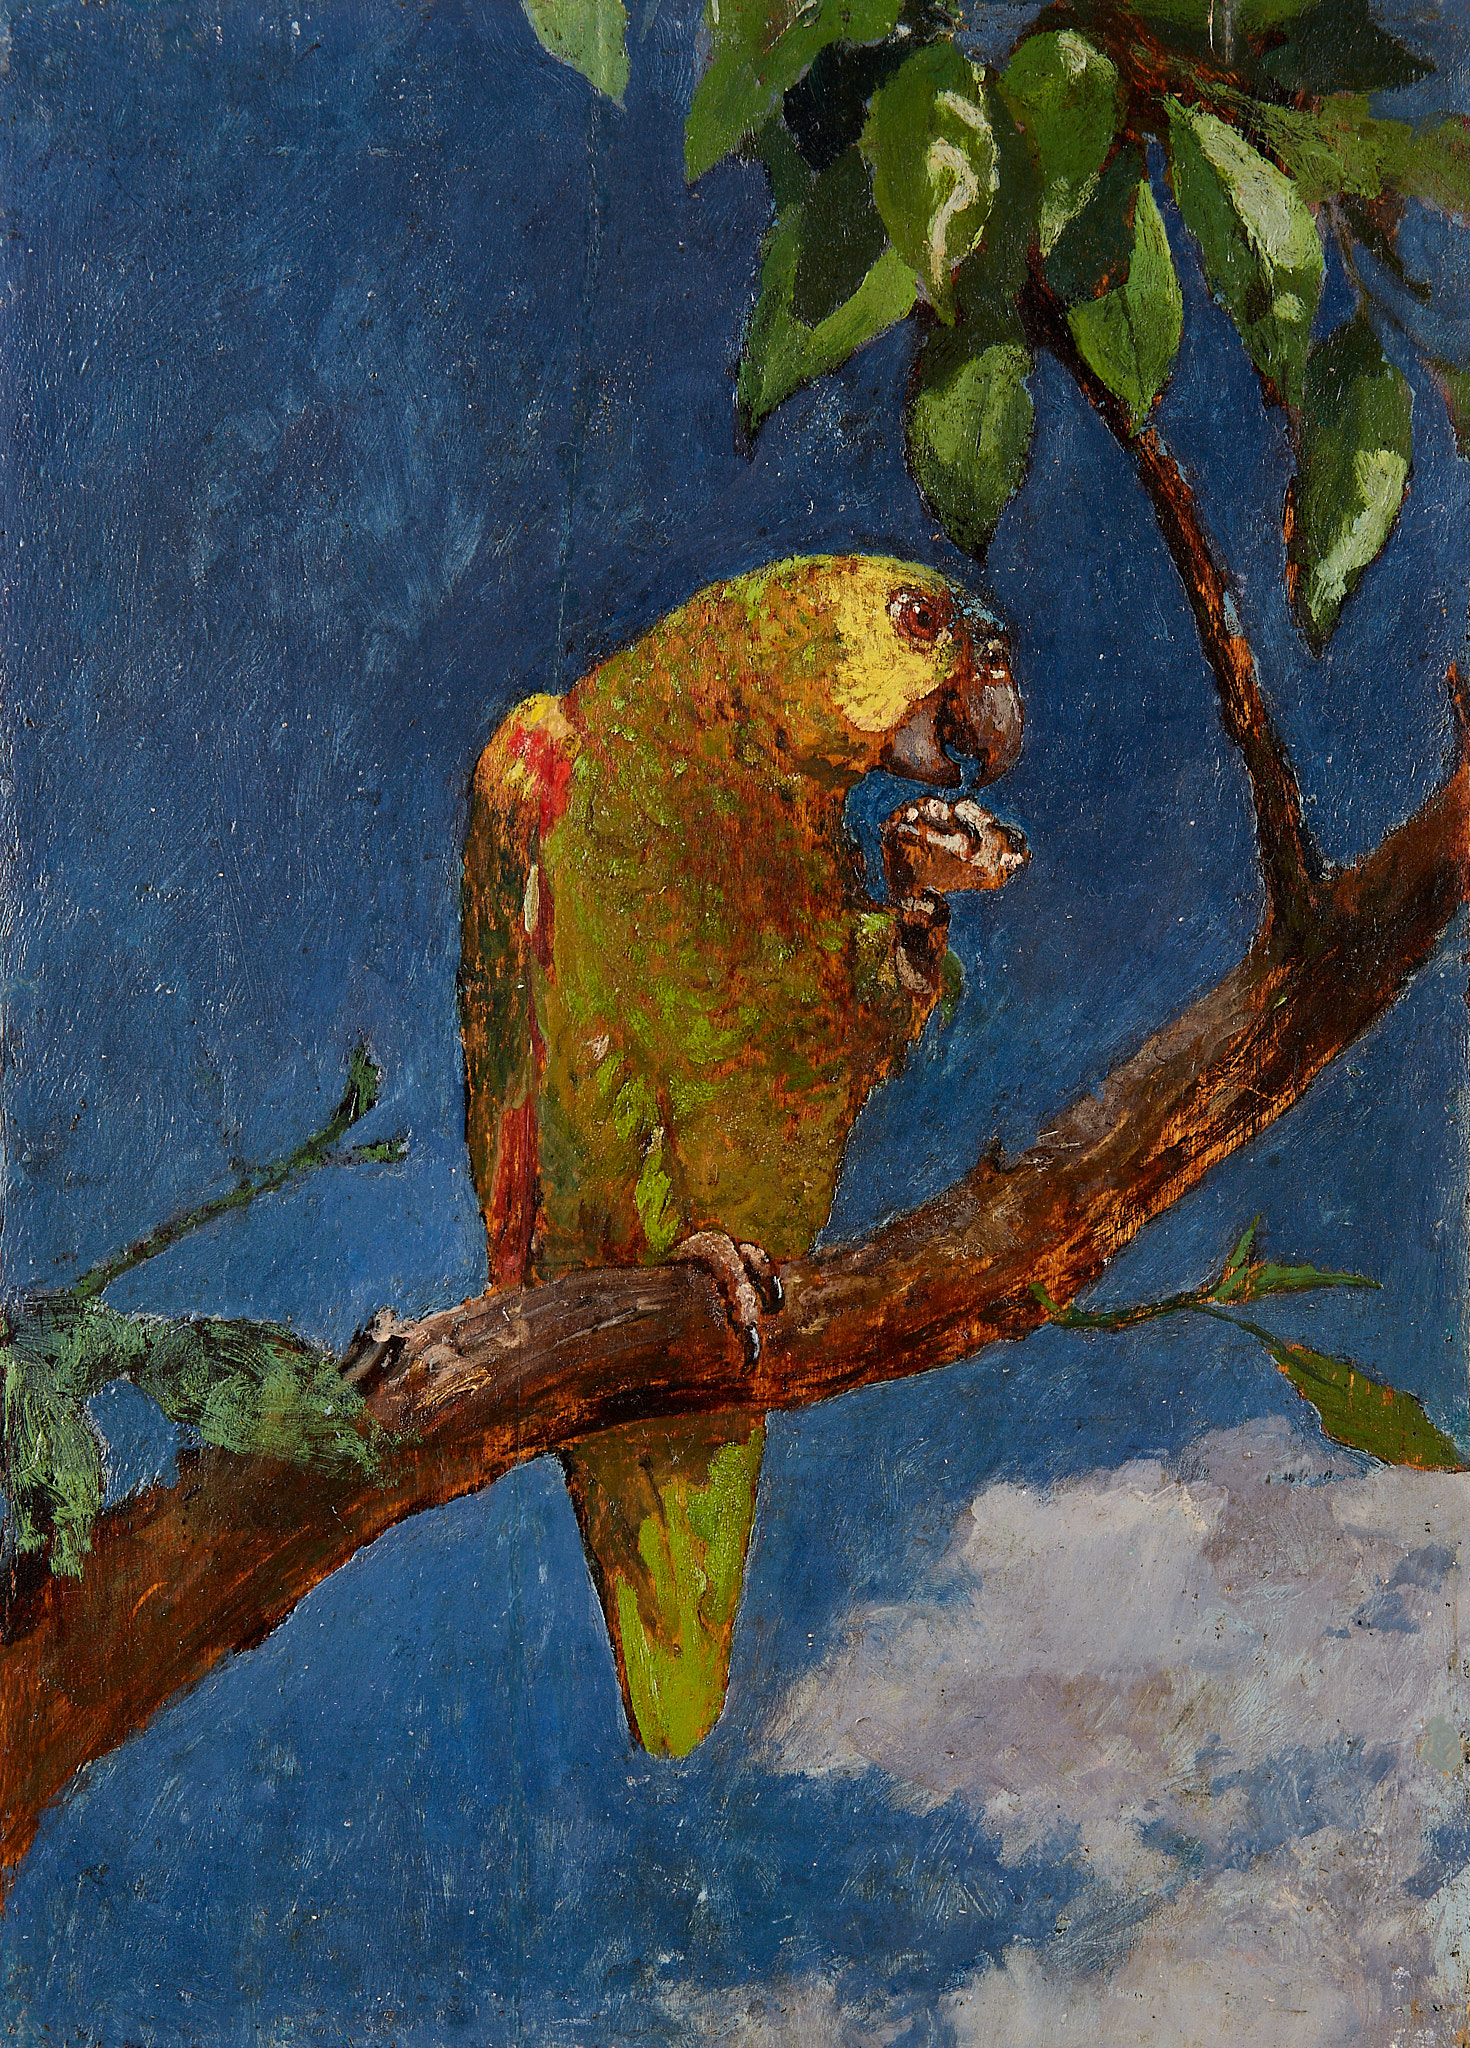 The Yellow Parrot